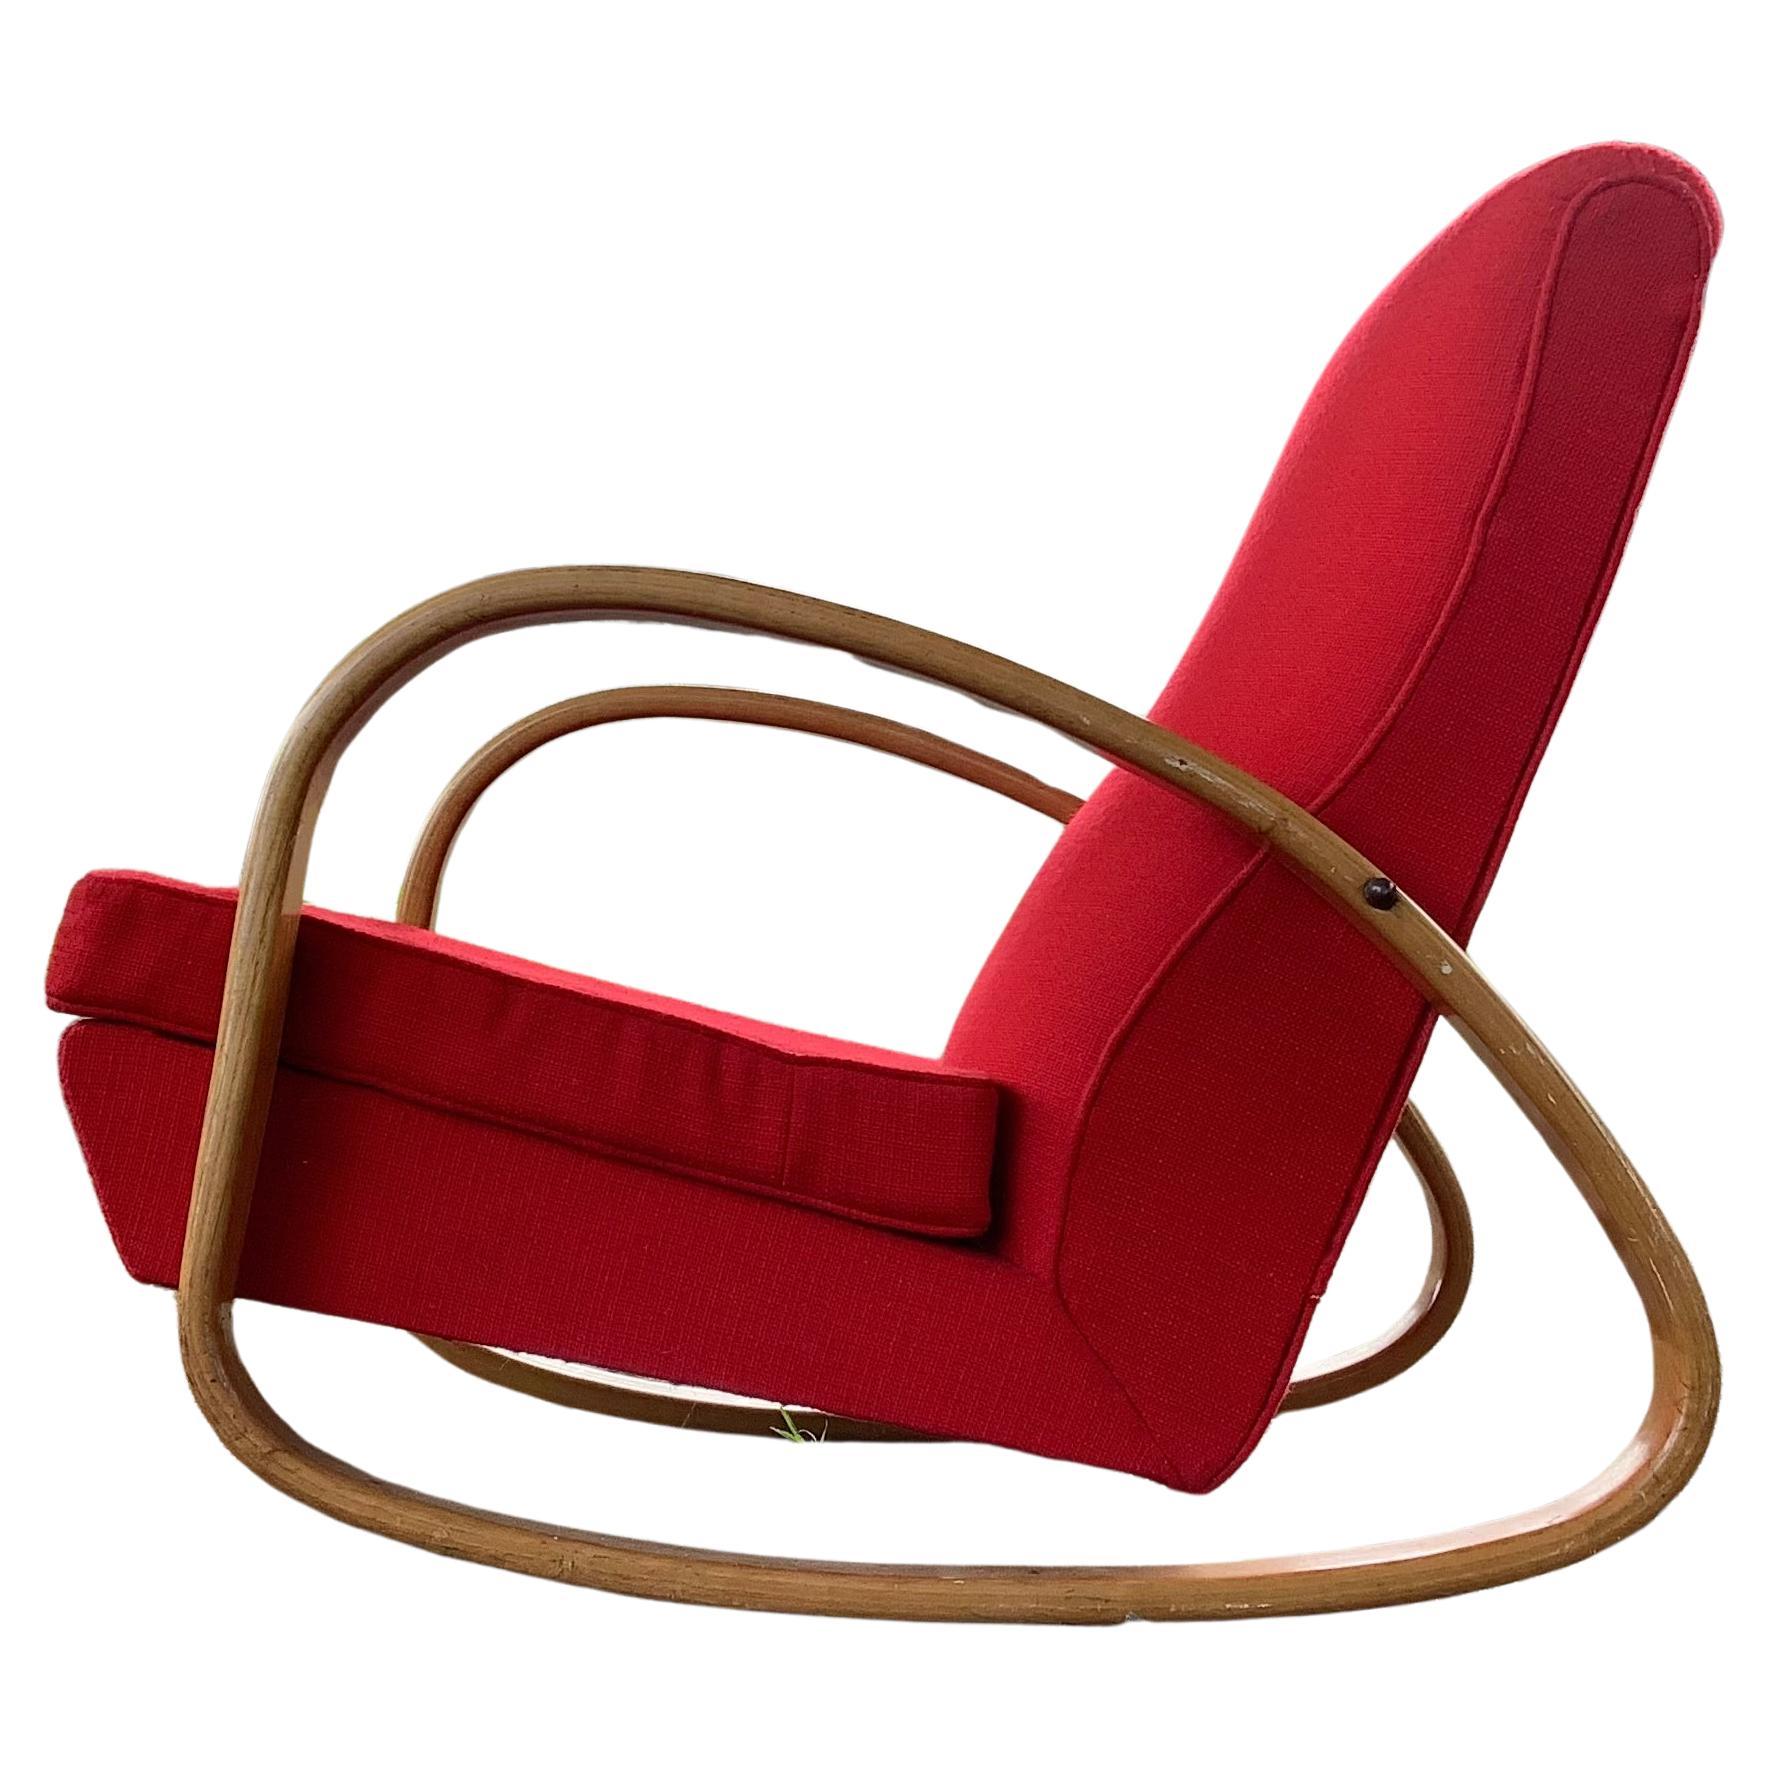 1960's midcentury modern French rocking chair